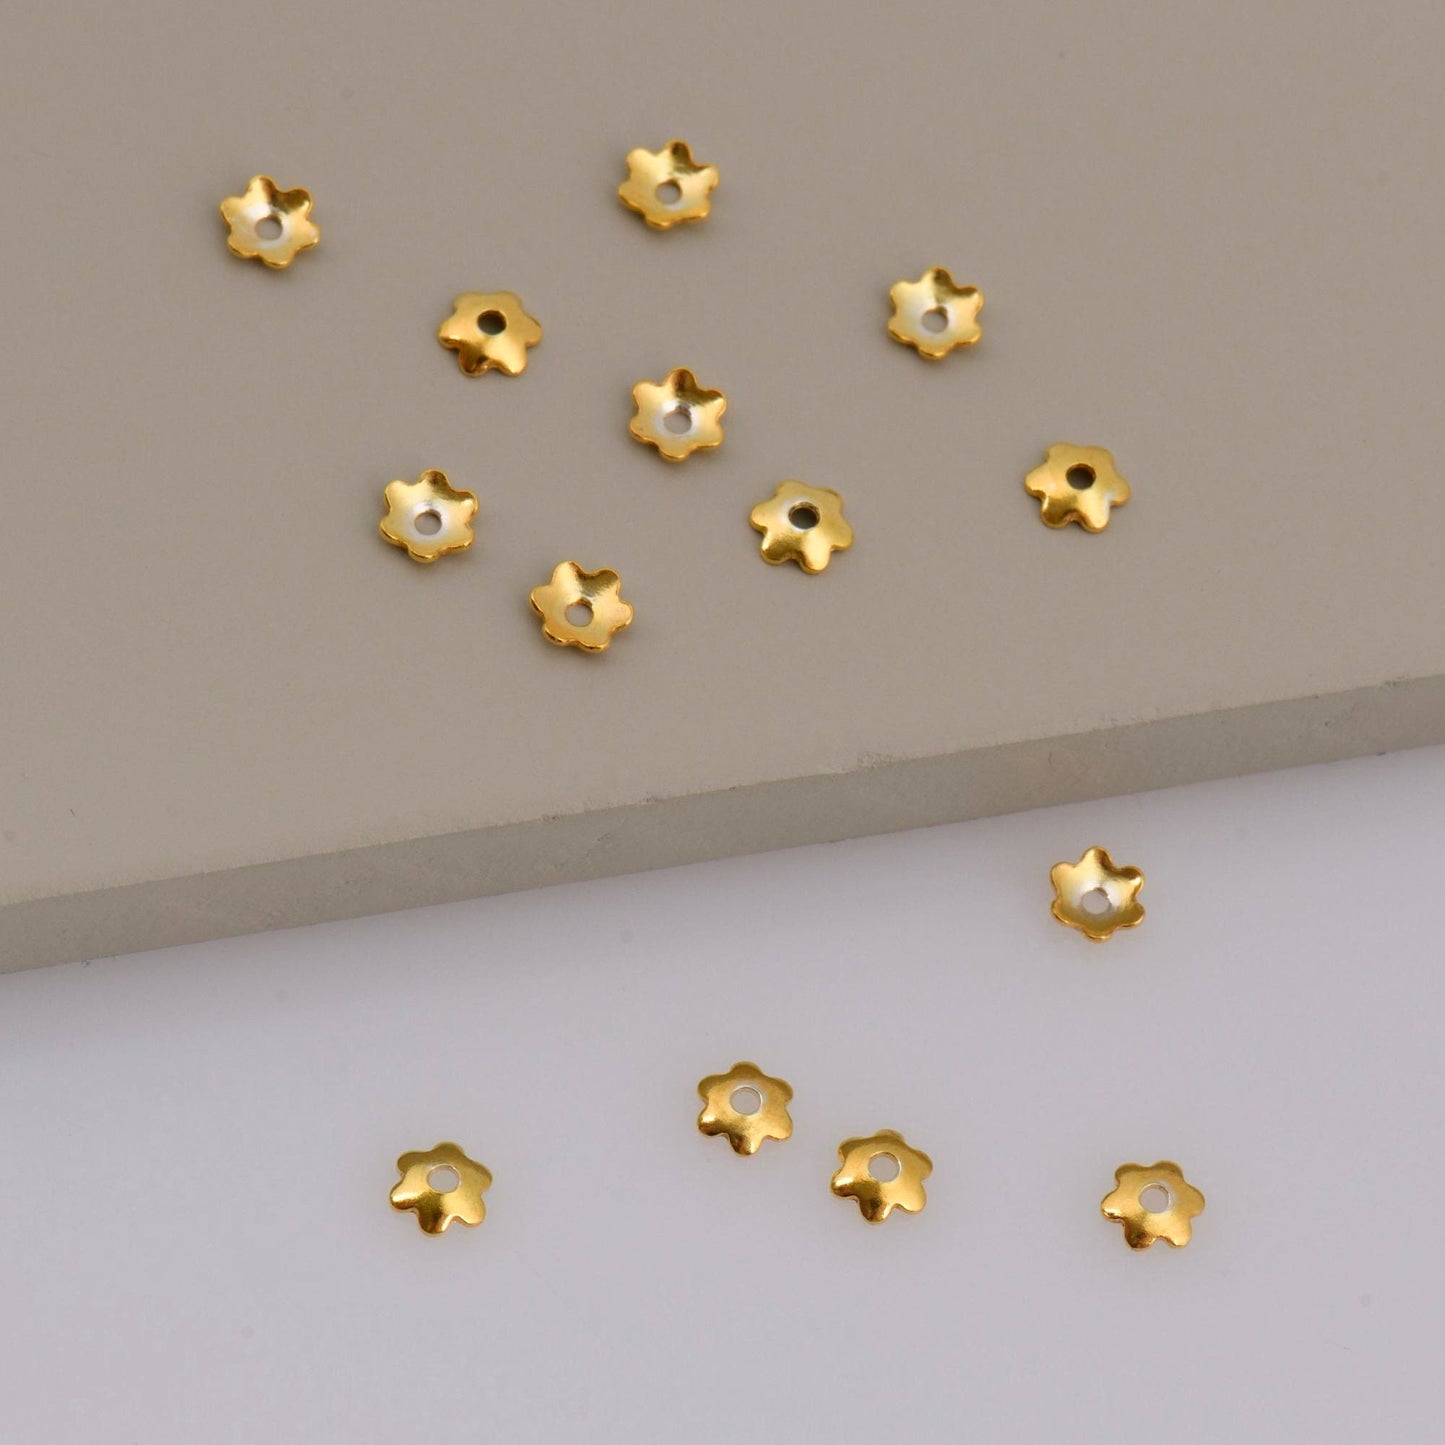 Sterling Silver Plain Bead Caps, 24K Gold Vermeil Shiny Plain Bead Caps, Smooth Bead Caps in 24K Gold, Jewelry Spacer Bead Caps, V/M14A-B-C